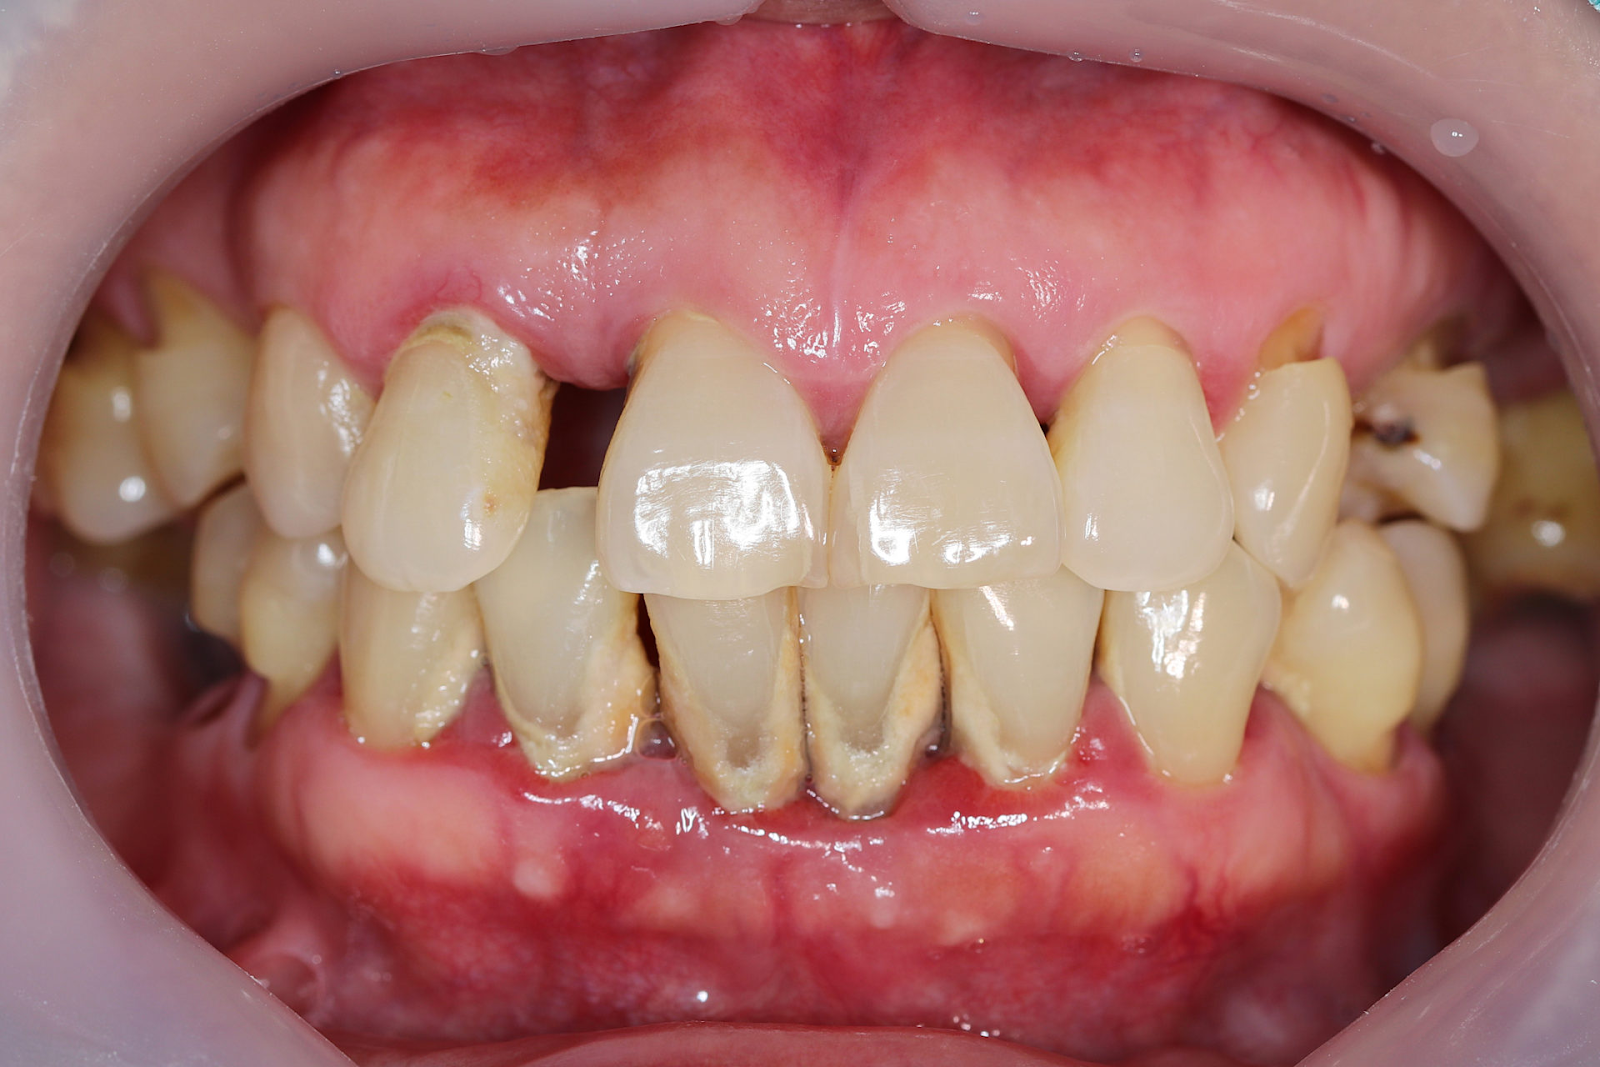 Very unhealthy gums leading to bone loss